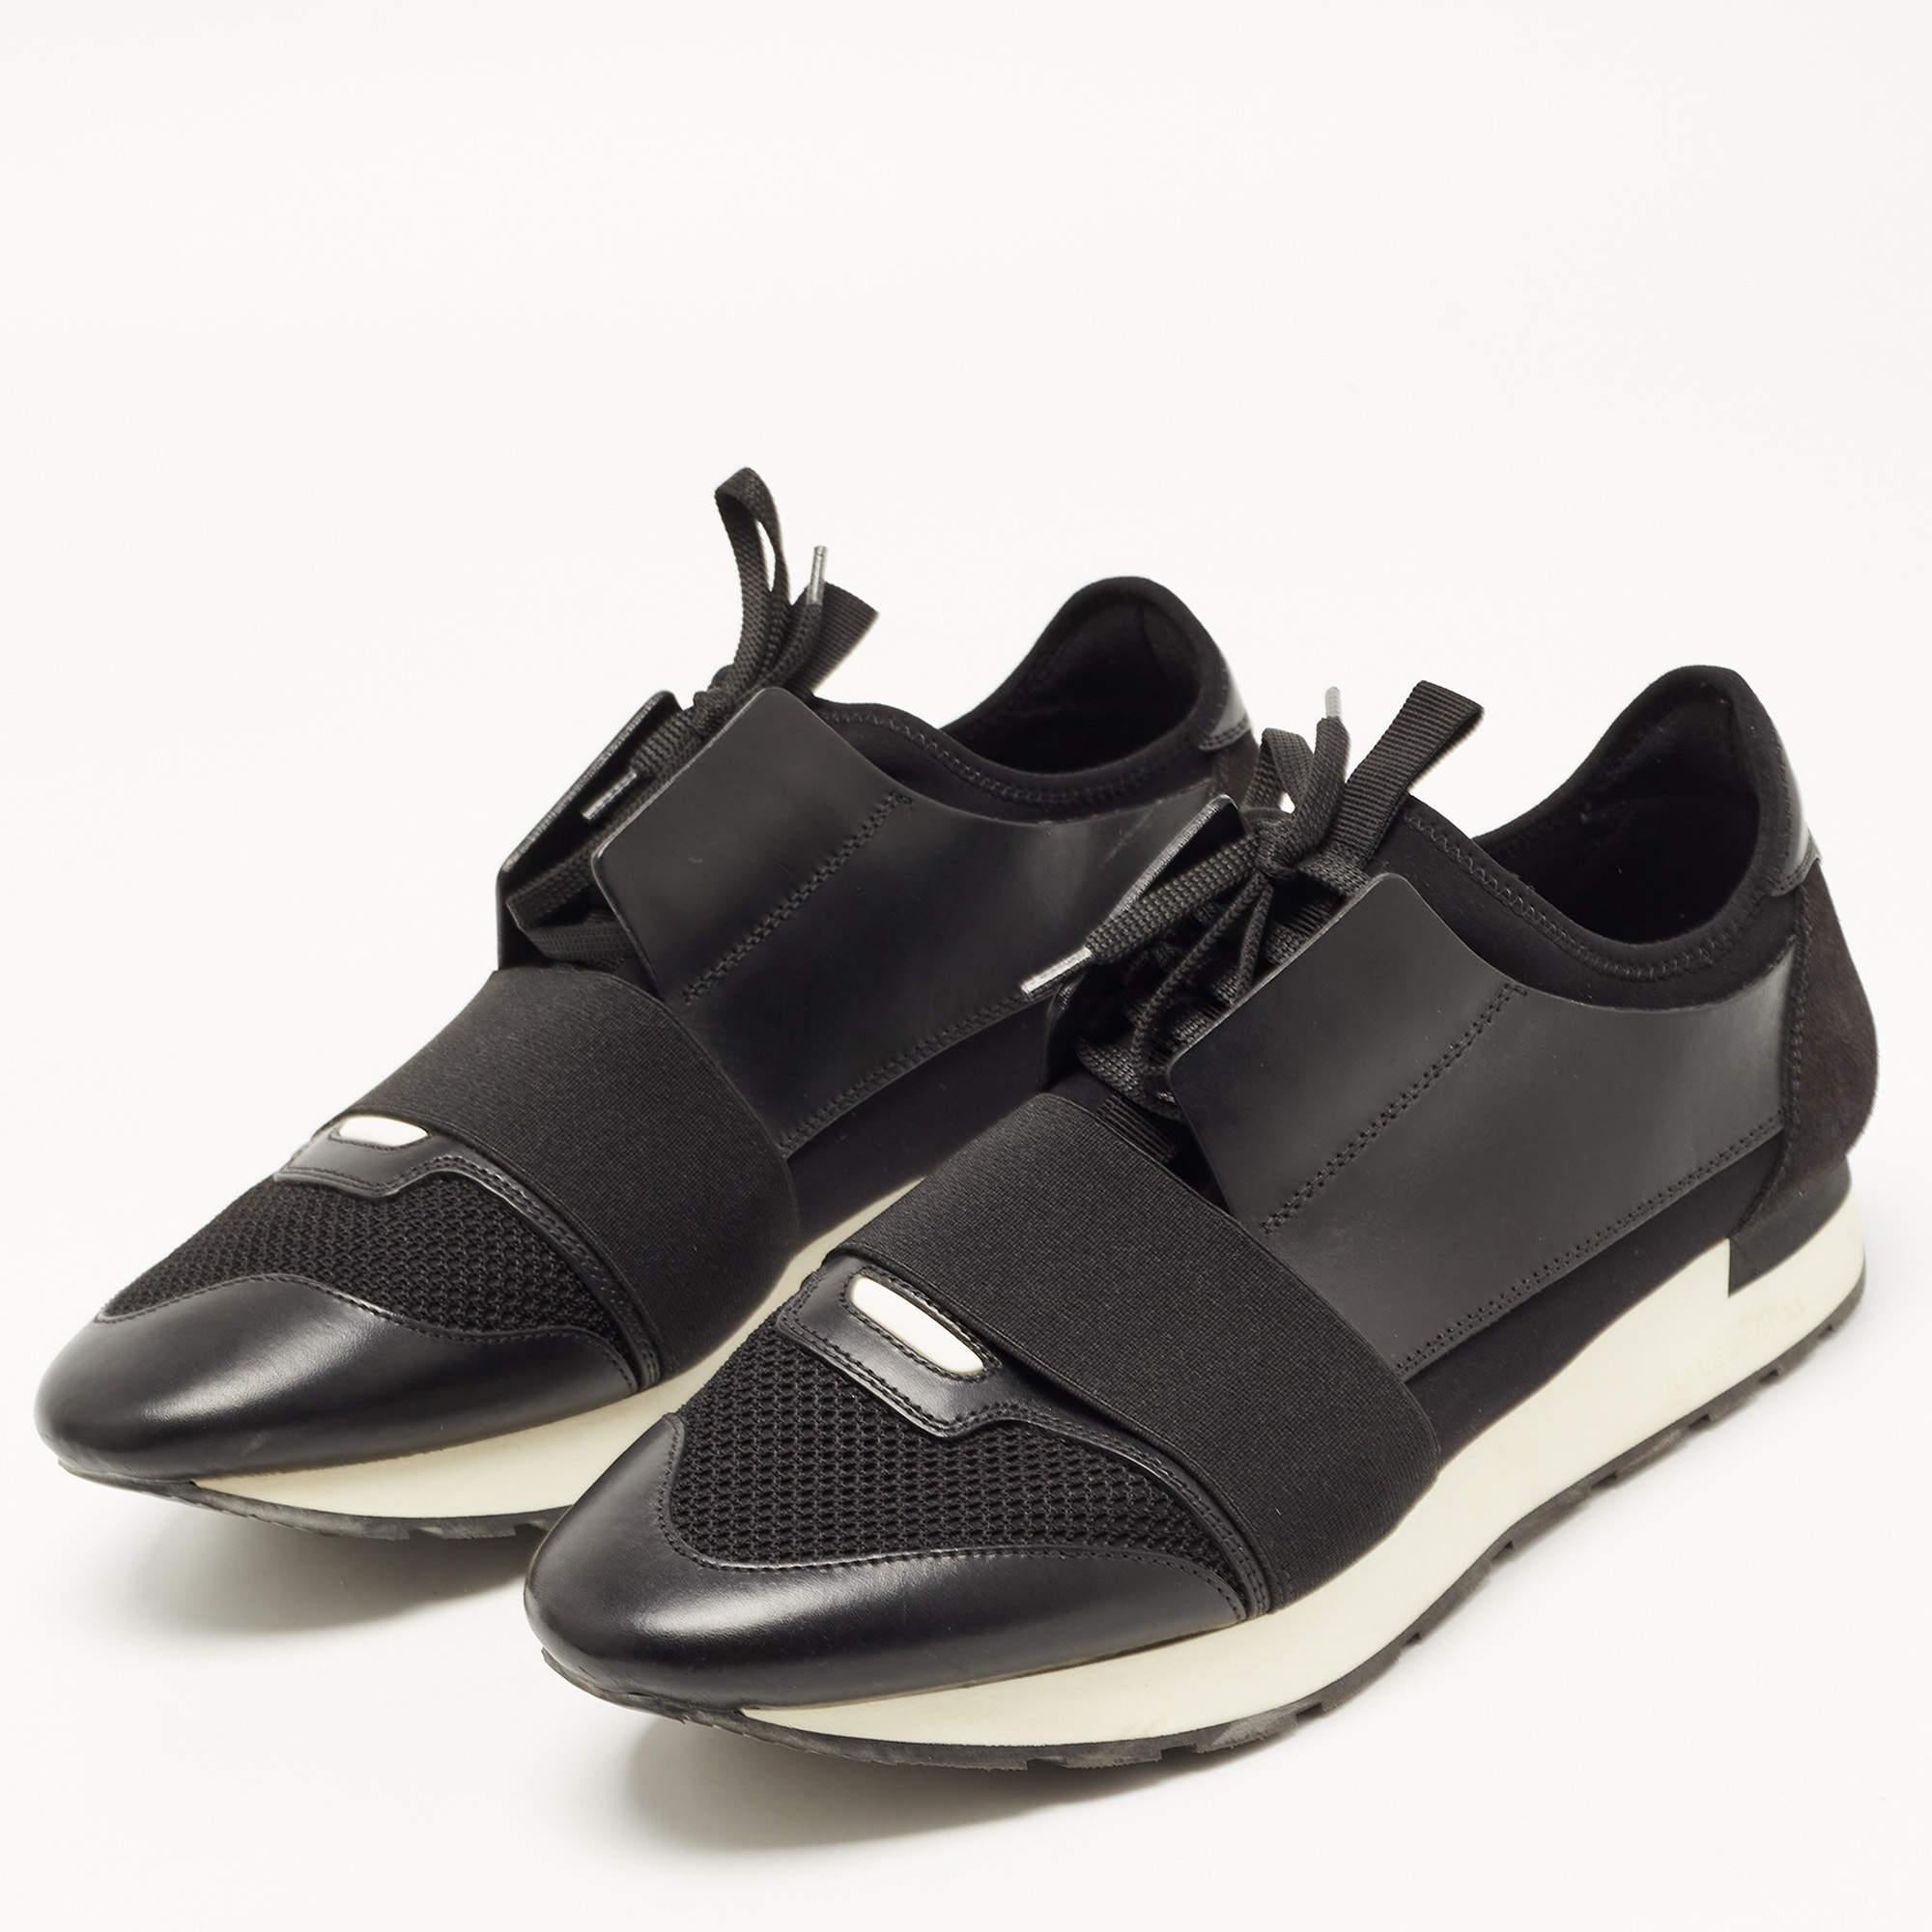 These sneakers from Balenciaga represent the best of classy fashion. They are crafted from high-quality materials and designed with nothing but style. A perfect fit for all casual occasions, these sneakers will spruce up any look effortlessly.

